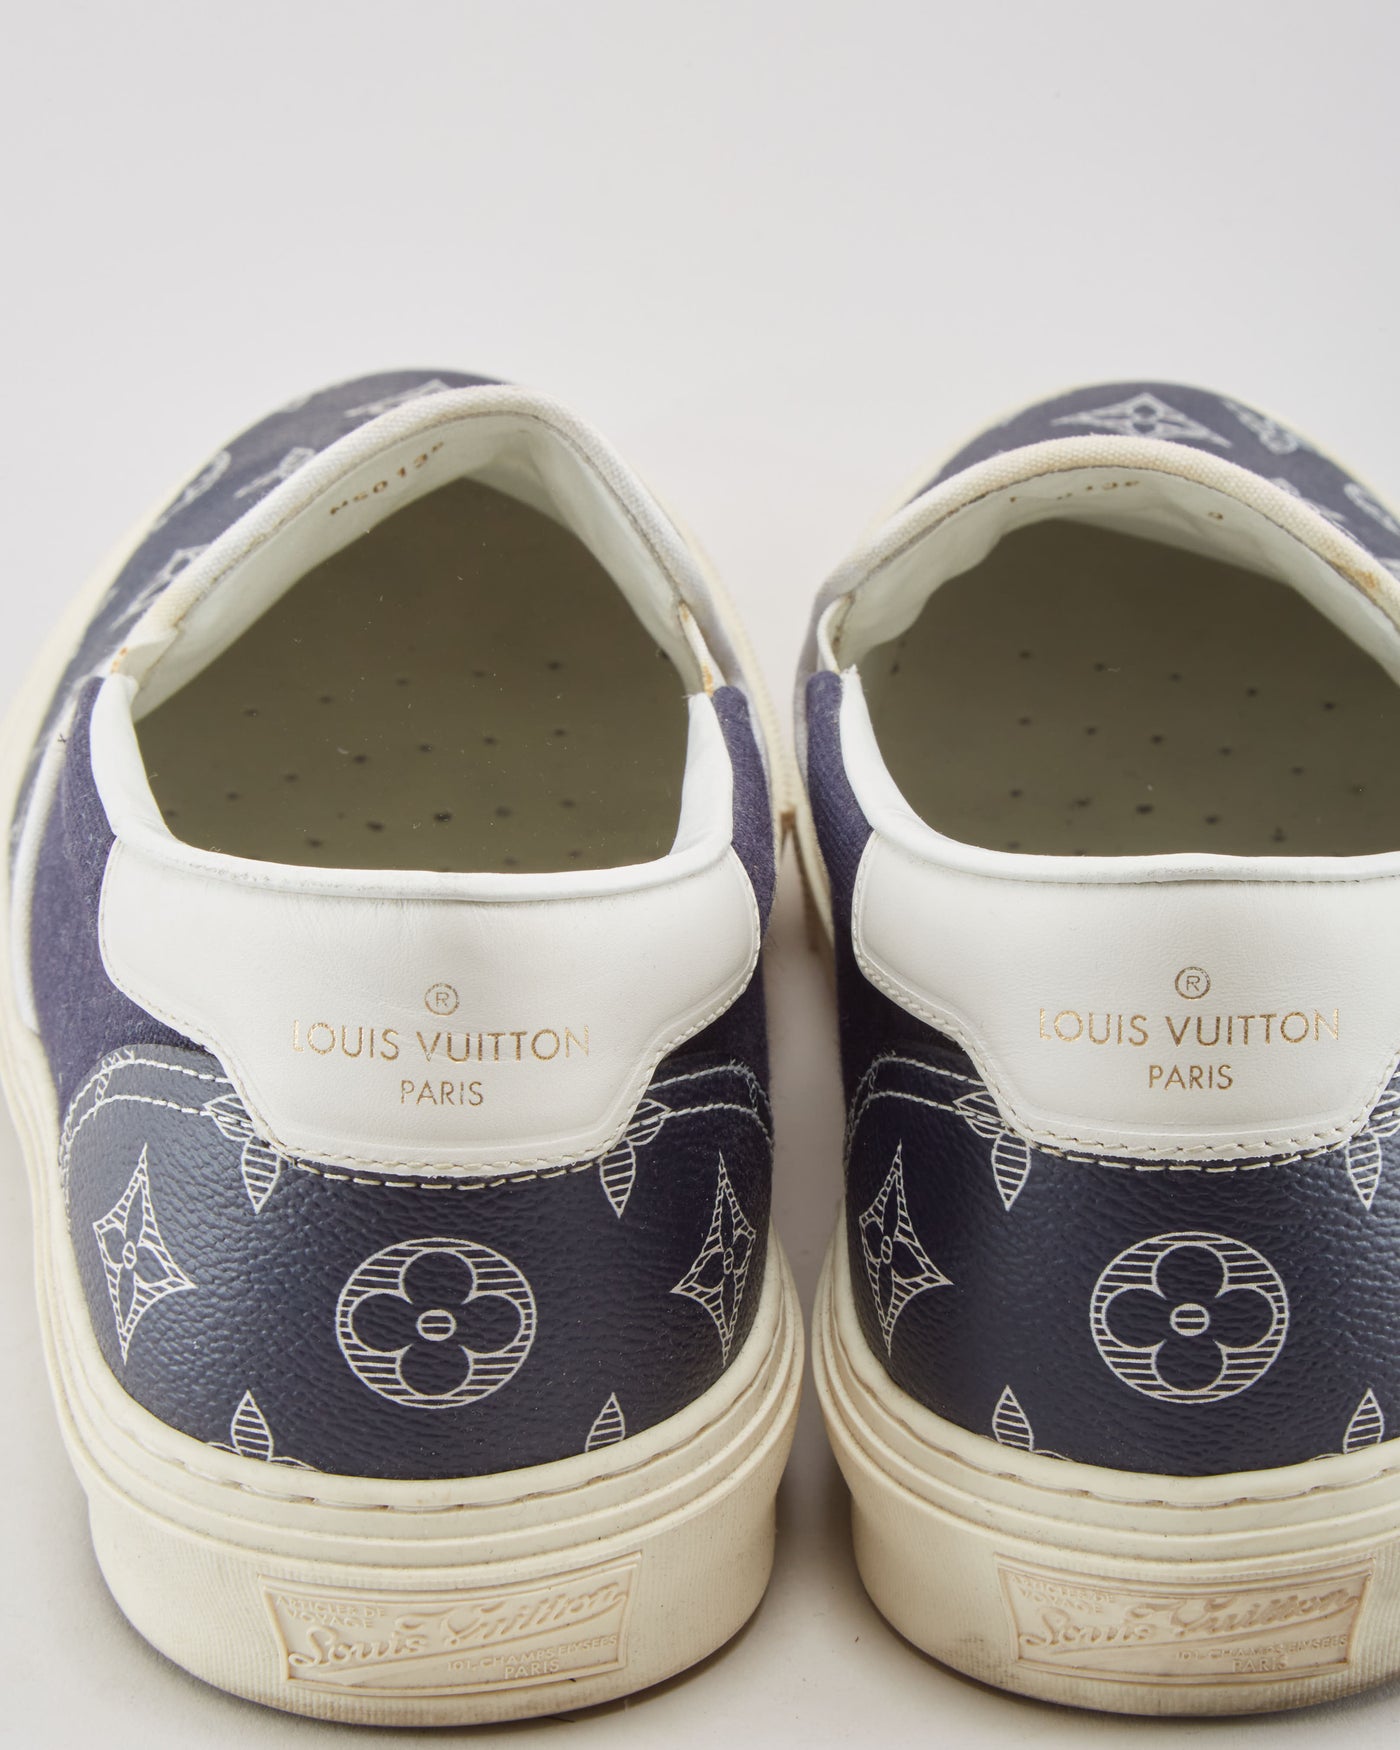 Trocadero leather low trainers Louis Vuitton Blue size 7.5 UK in